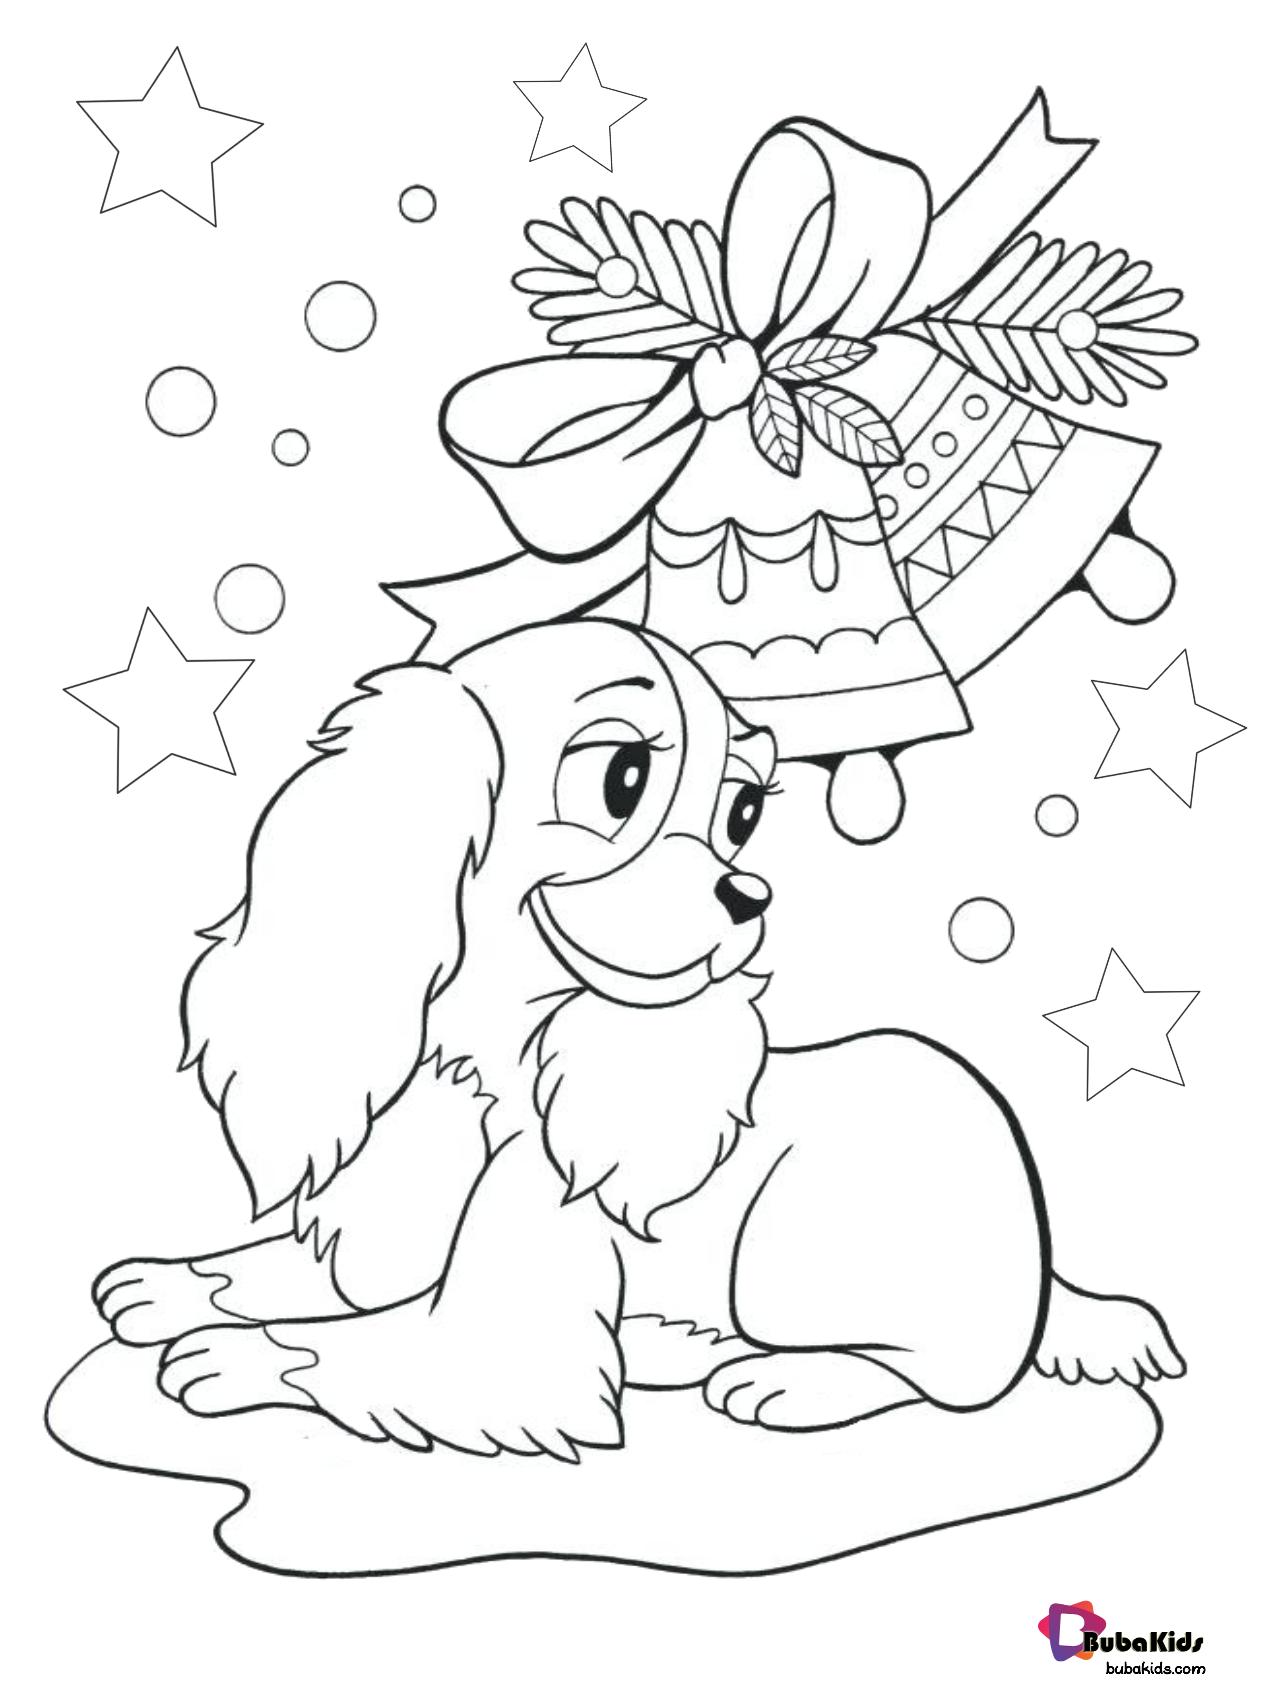 Cute christmas dog coloring page. Wallpaper